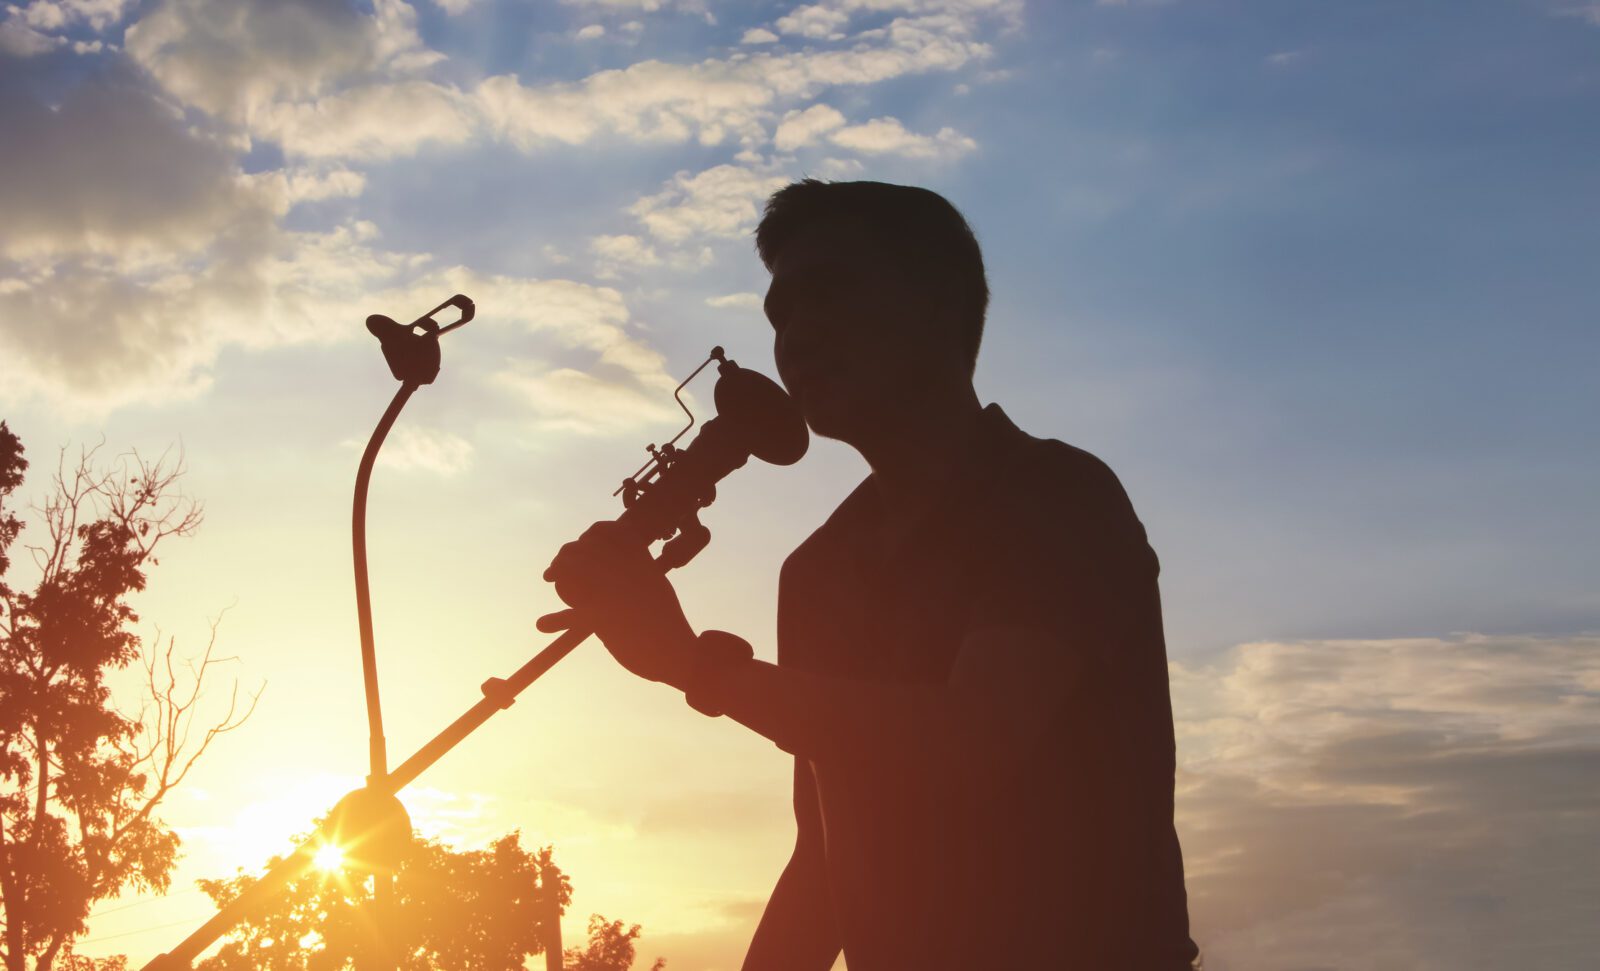 Silhouette of Singer holding a microphone stand and performing outdoor.